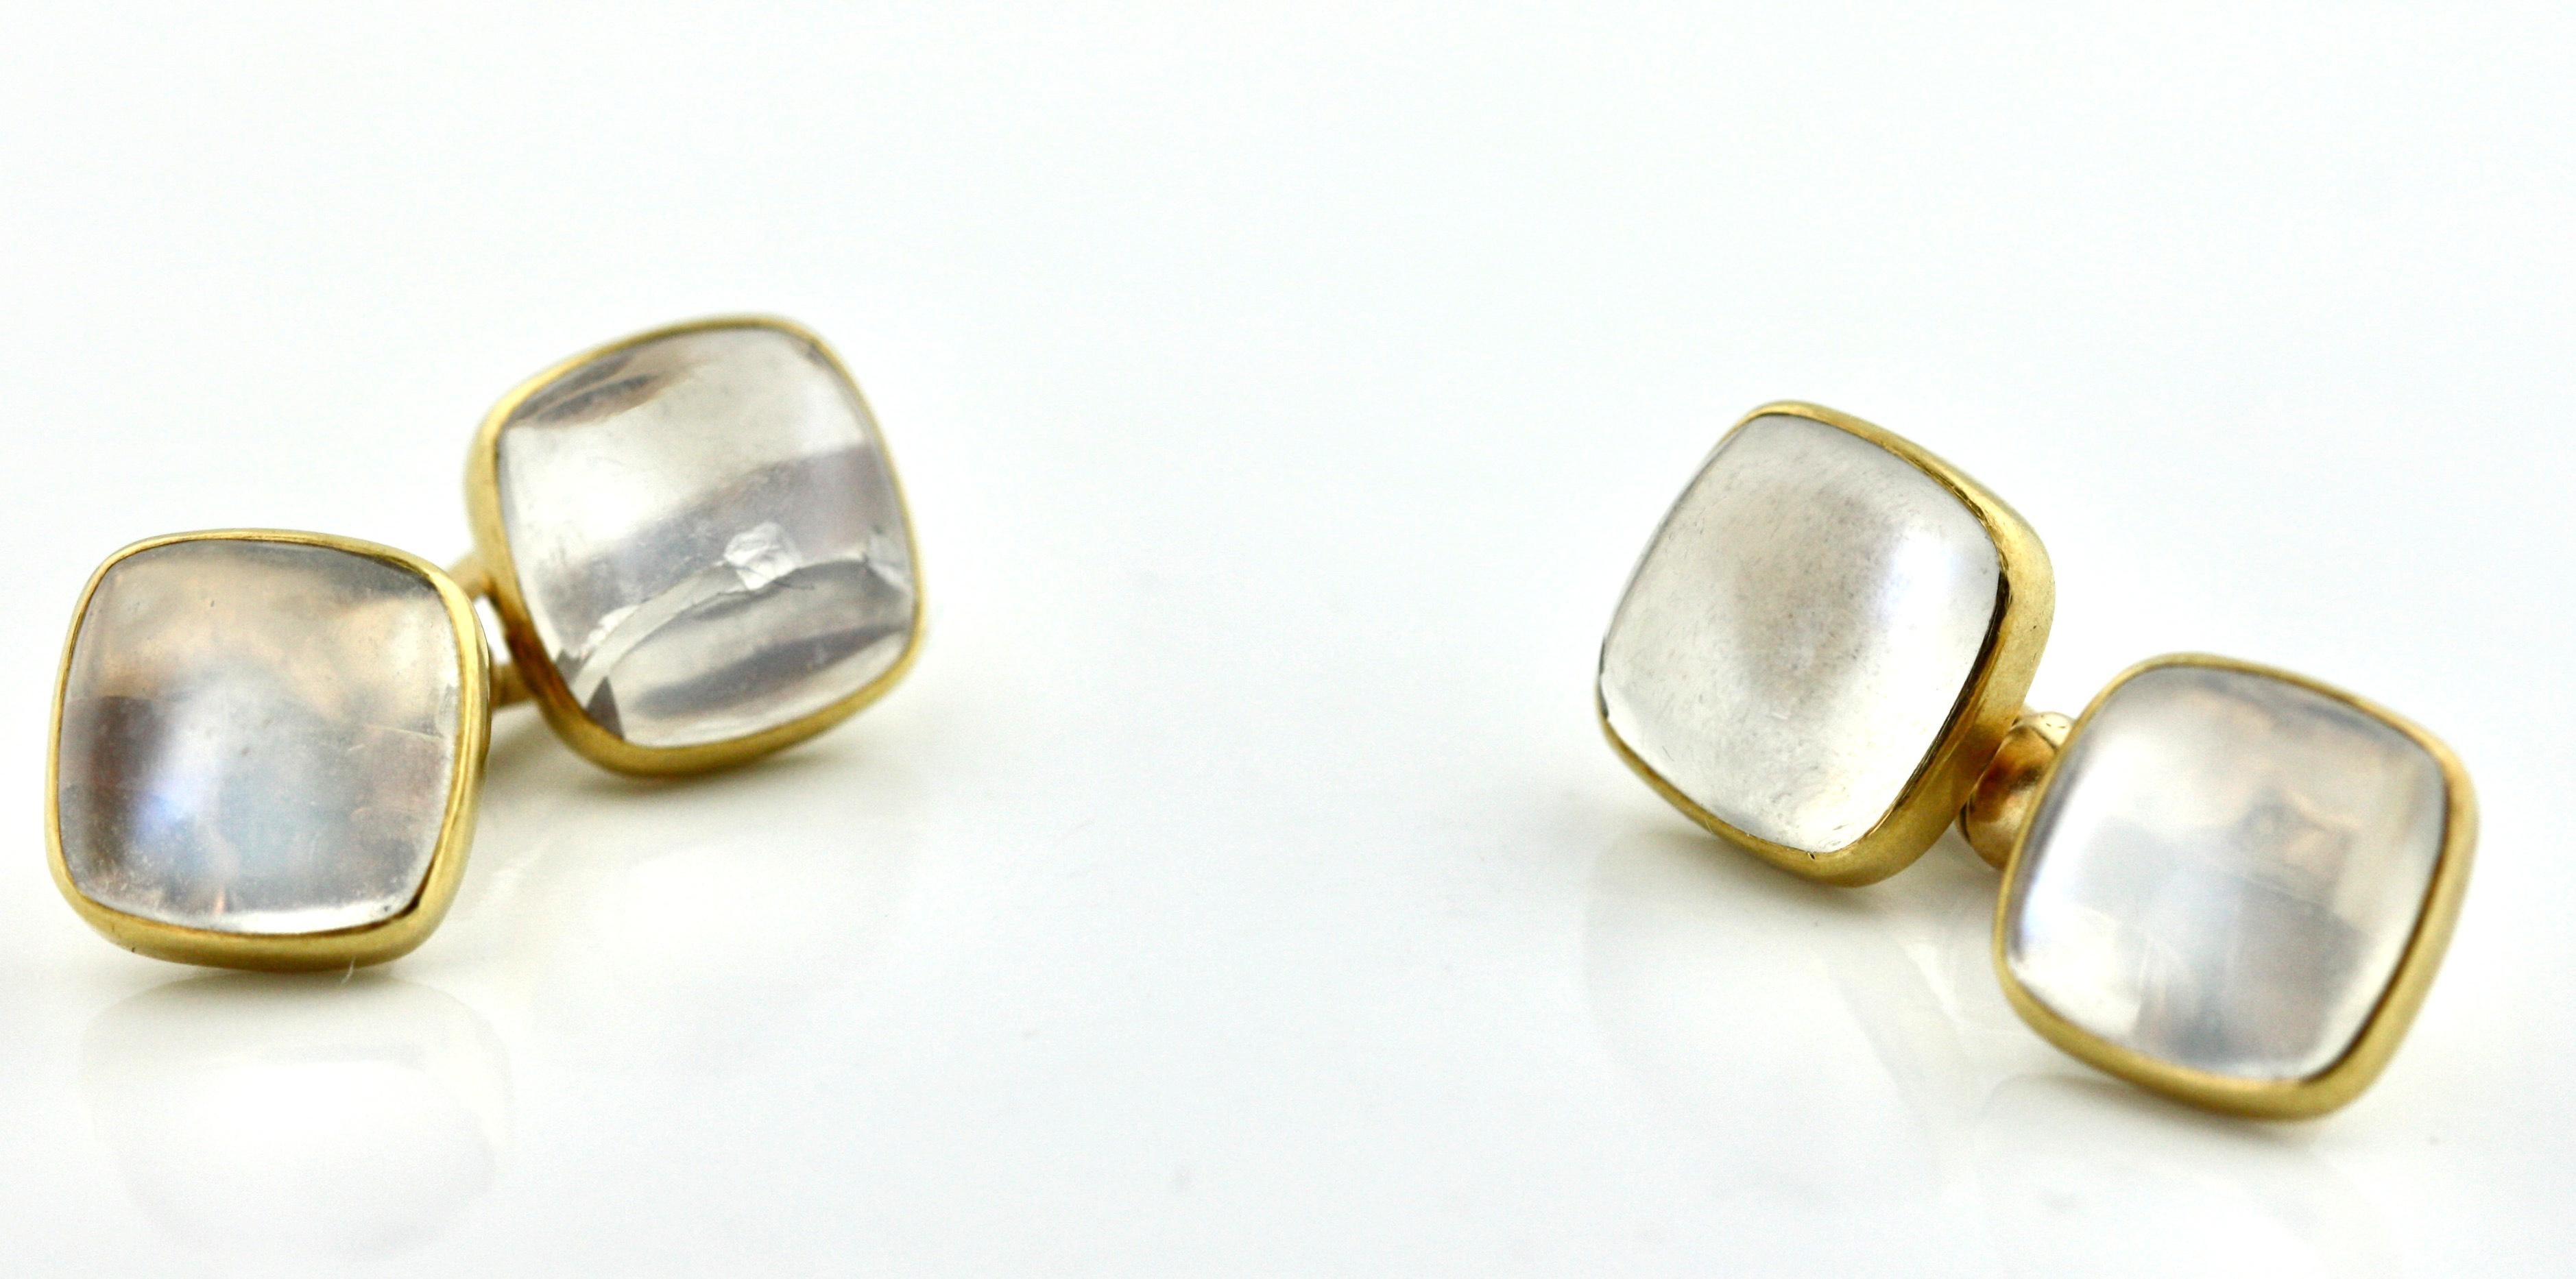 
Pair of Moon Stone Cufflinks
Featuring four sugarloaf cabochon moonstones, within frames of gold.
Cufflink head dimensions 10 x 10x 4.6 mm
14 karat gold